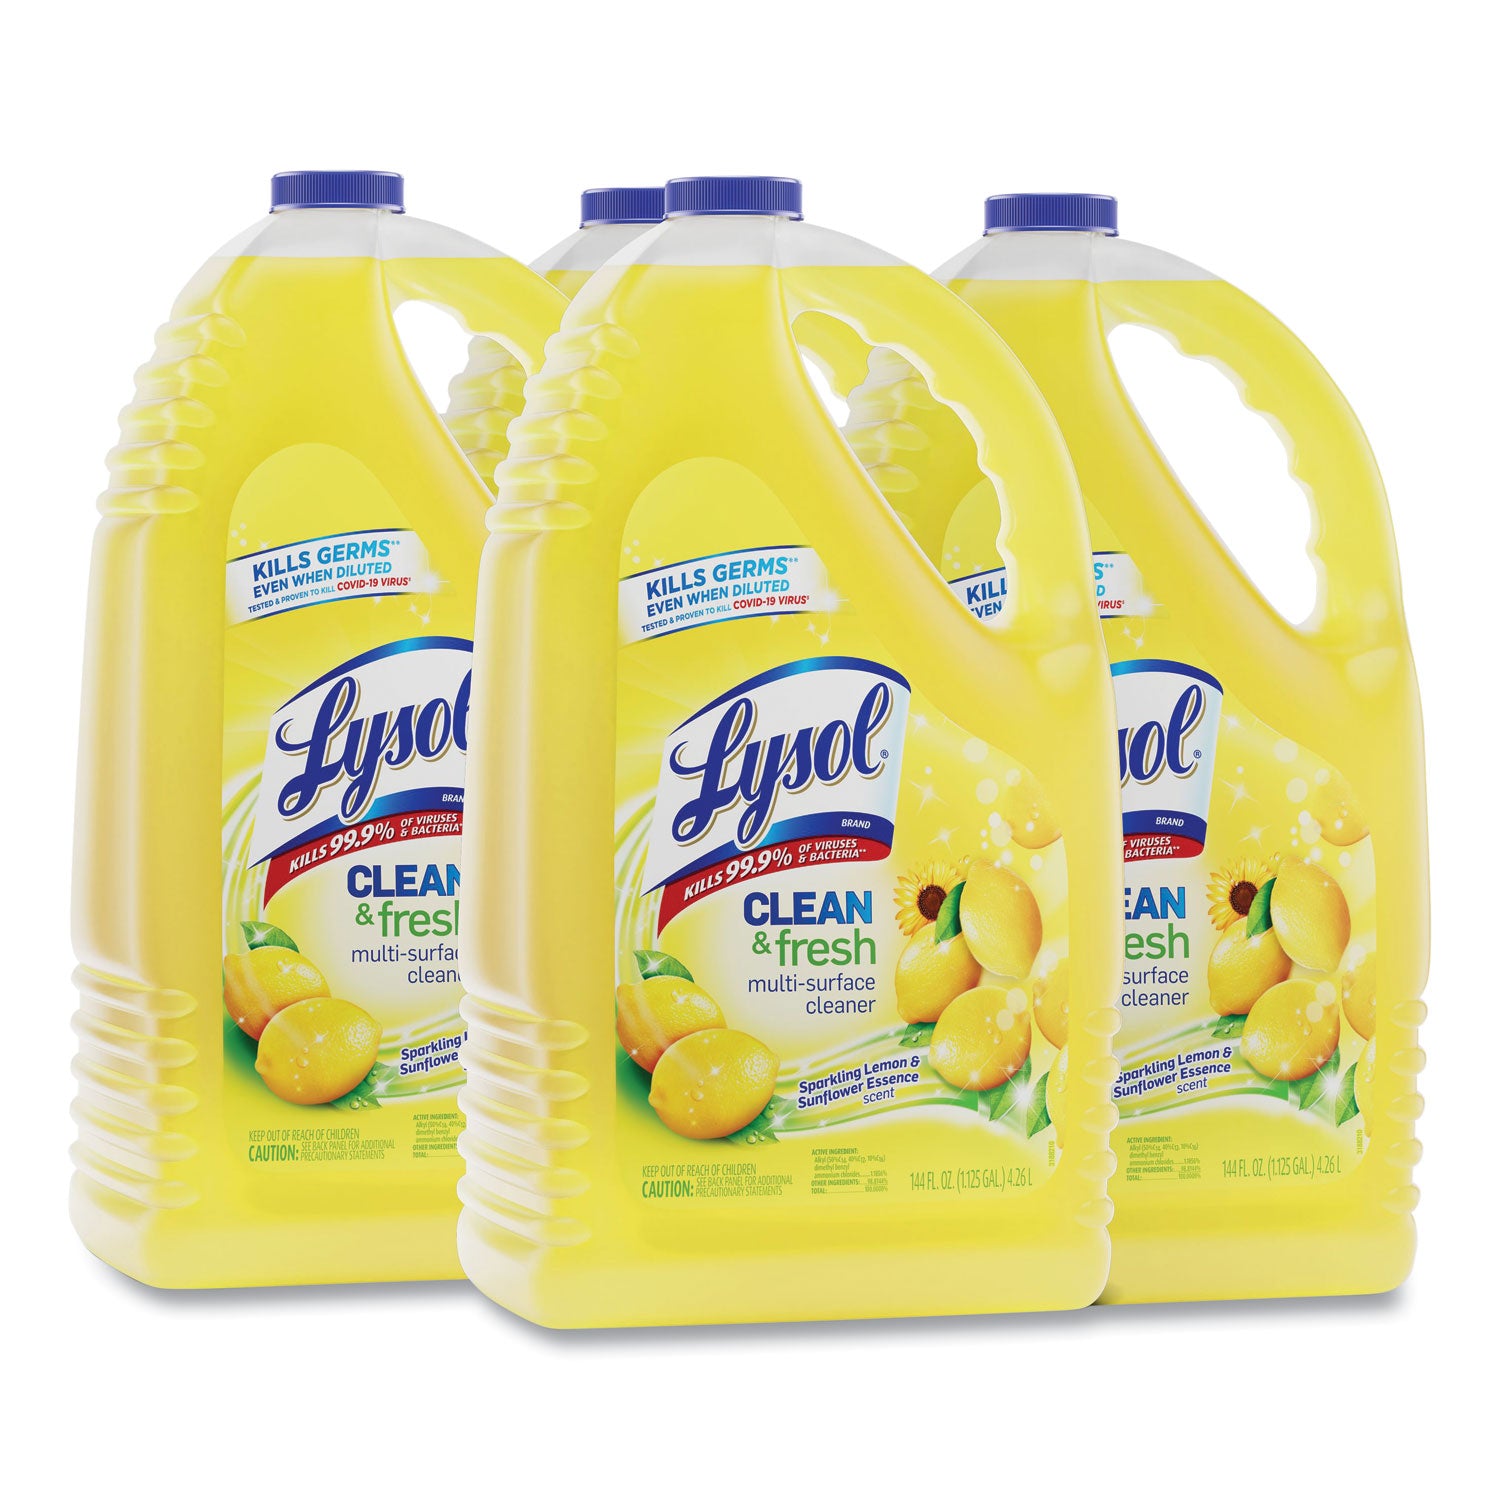 clean-and-fresh-multi-surface-cleaner-sparkling-lemon-and-sunflower-essence-144-oz-bottle-4-carton_rac77617 - 1